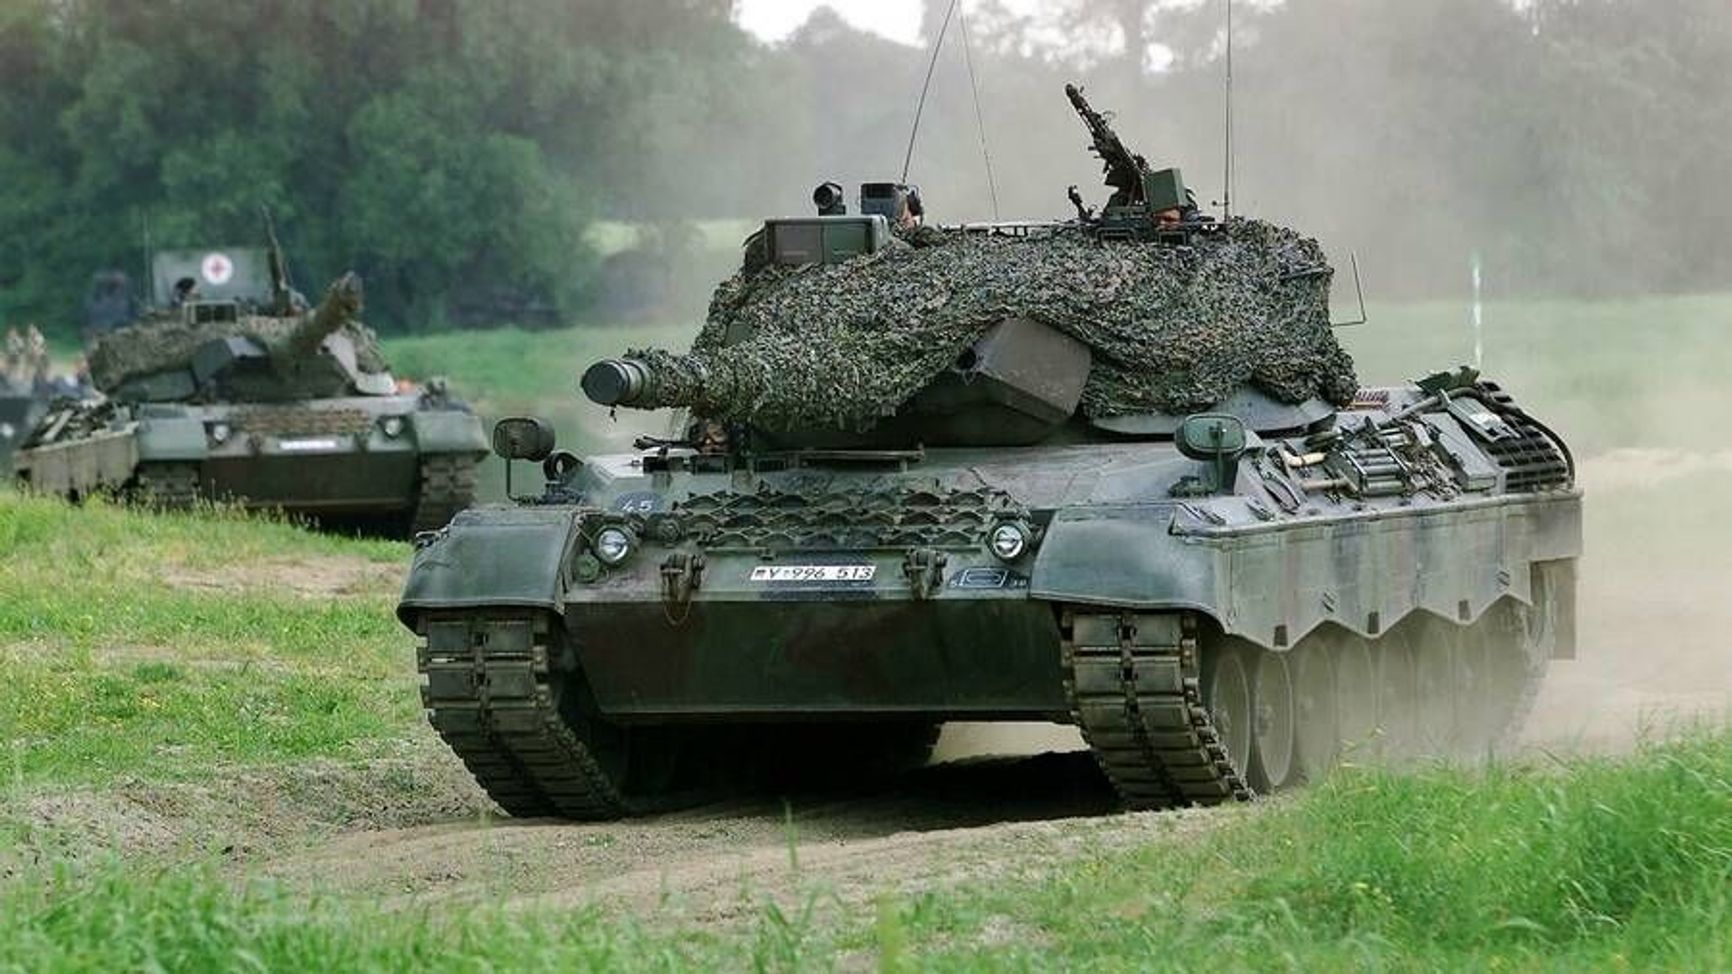 The Leopard 1A5